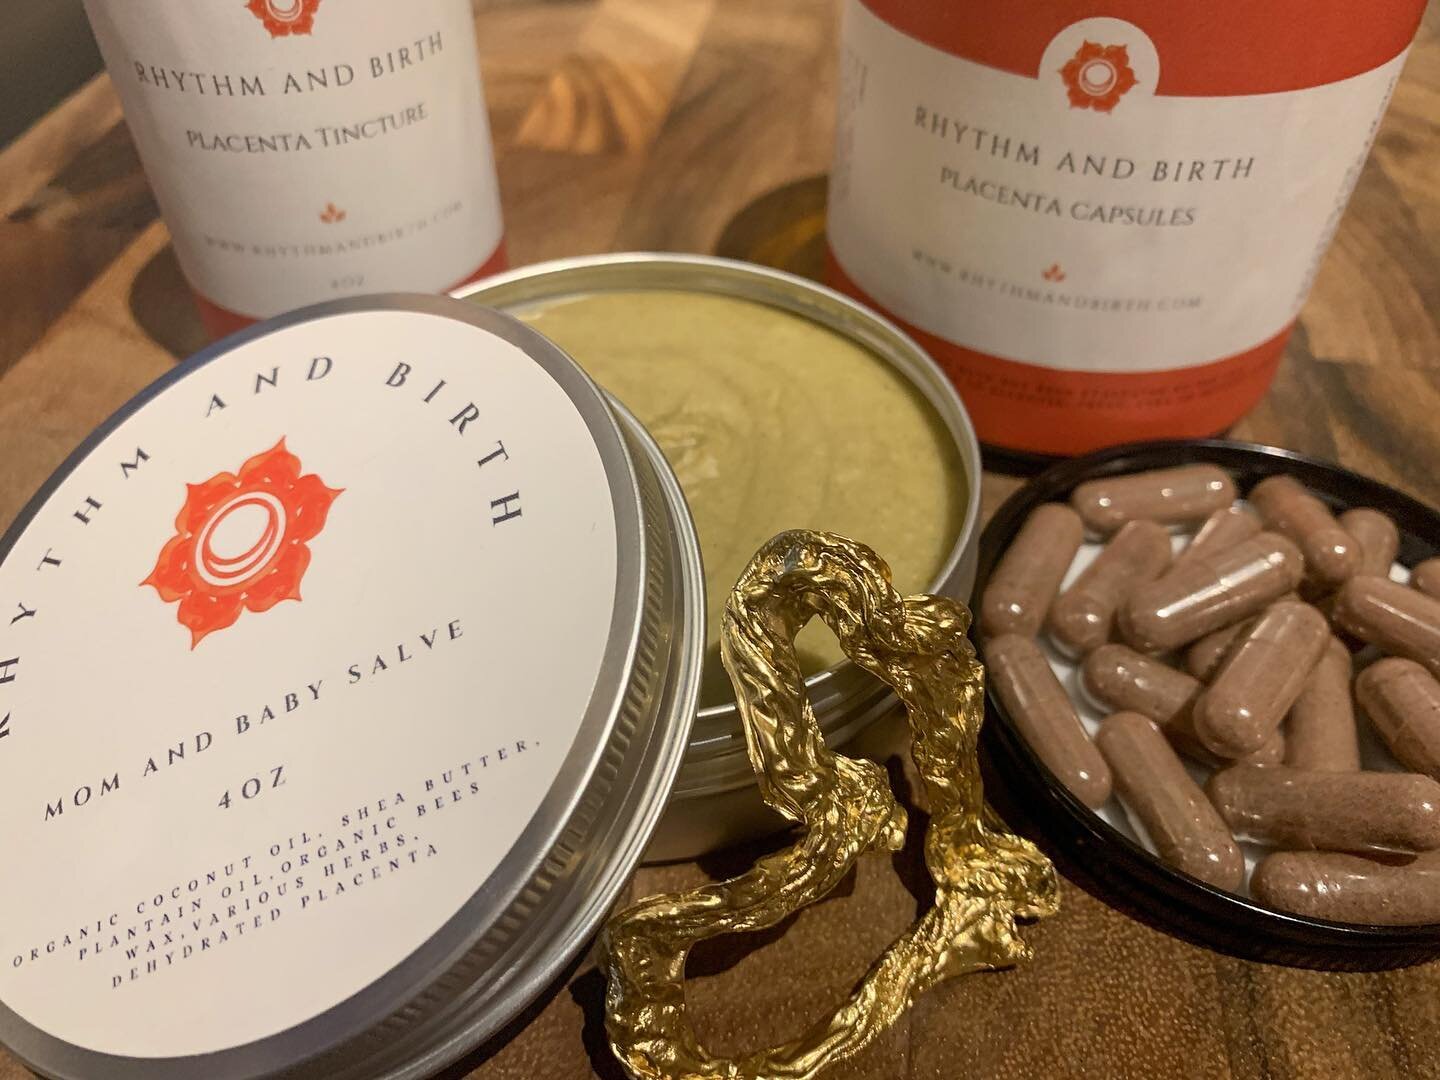 &quot;Mom and Baby Salve&quot; is just one of the amazing ways you can use your placenta, as the healing possibilities are endless.

Your salve can be used for: 

🧡Sore/Cracked Nipples
🧡Cesarean Section Scar
🧡Perineal Tears
🧡Baby Acne
🧡Eczema
🧡